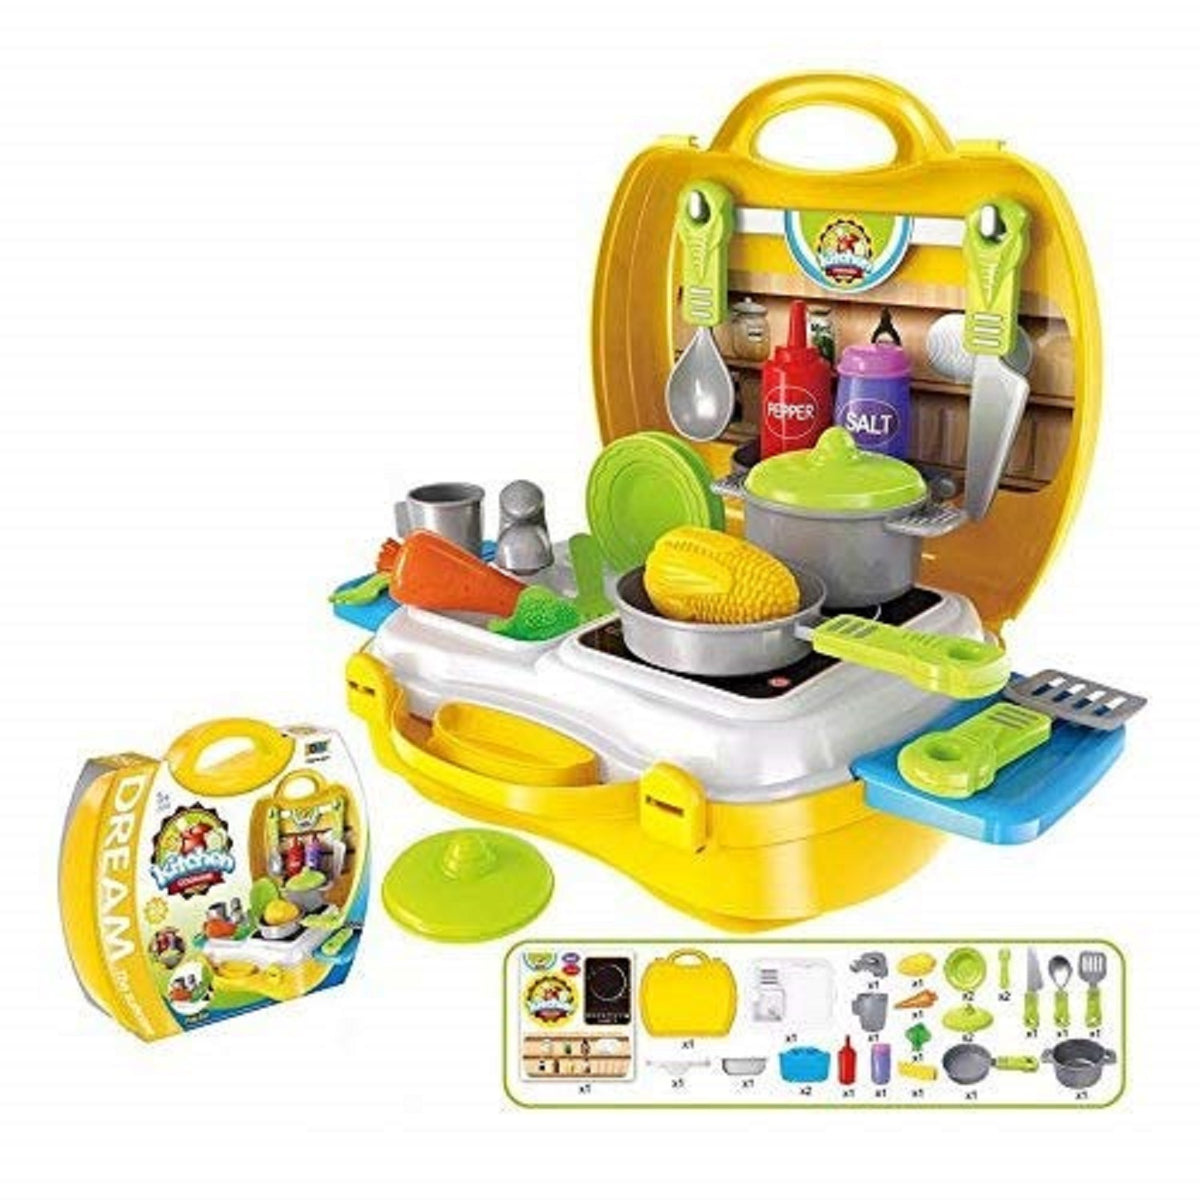 Food Play Set Toys for Girls - Kitchen Cooking Play Set Toys for Girls, Pretend Play Toys for Kids (Set of 26 Pcs)